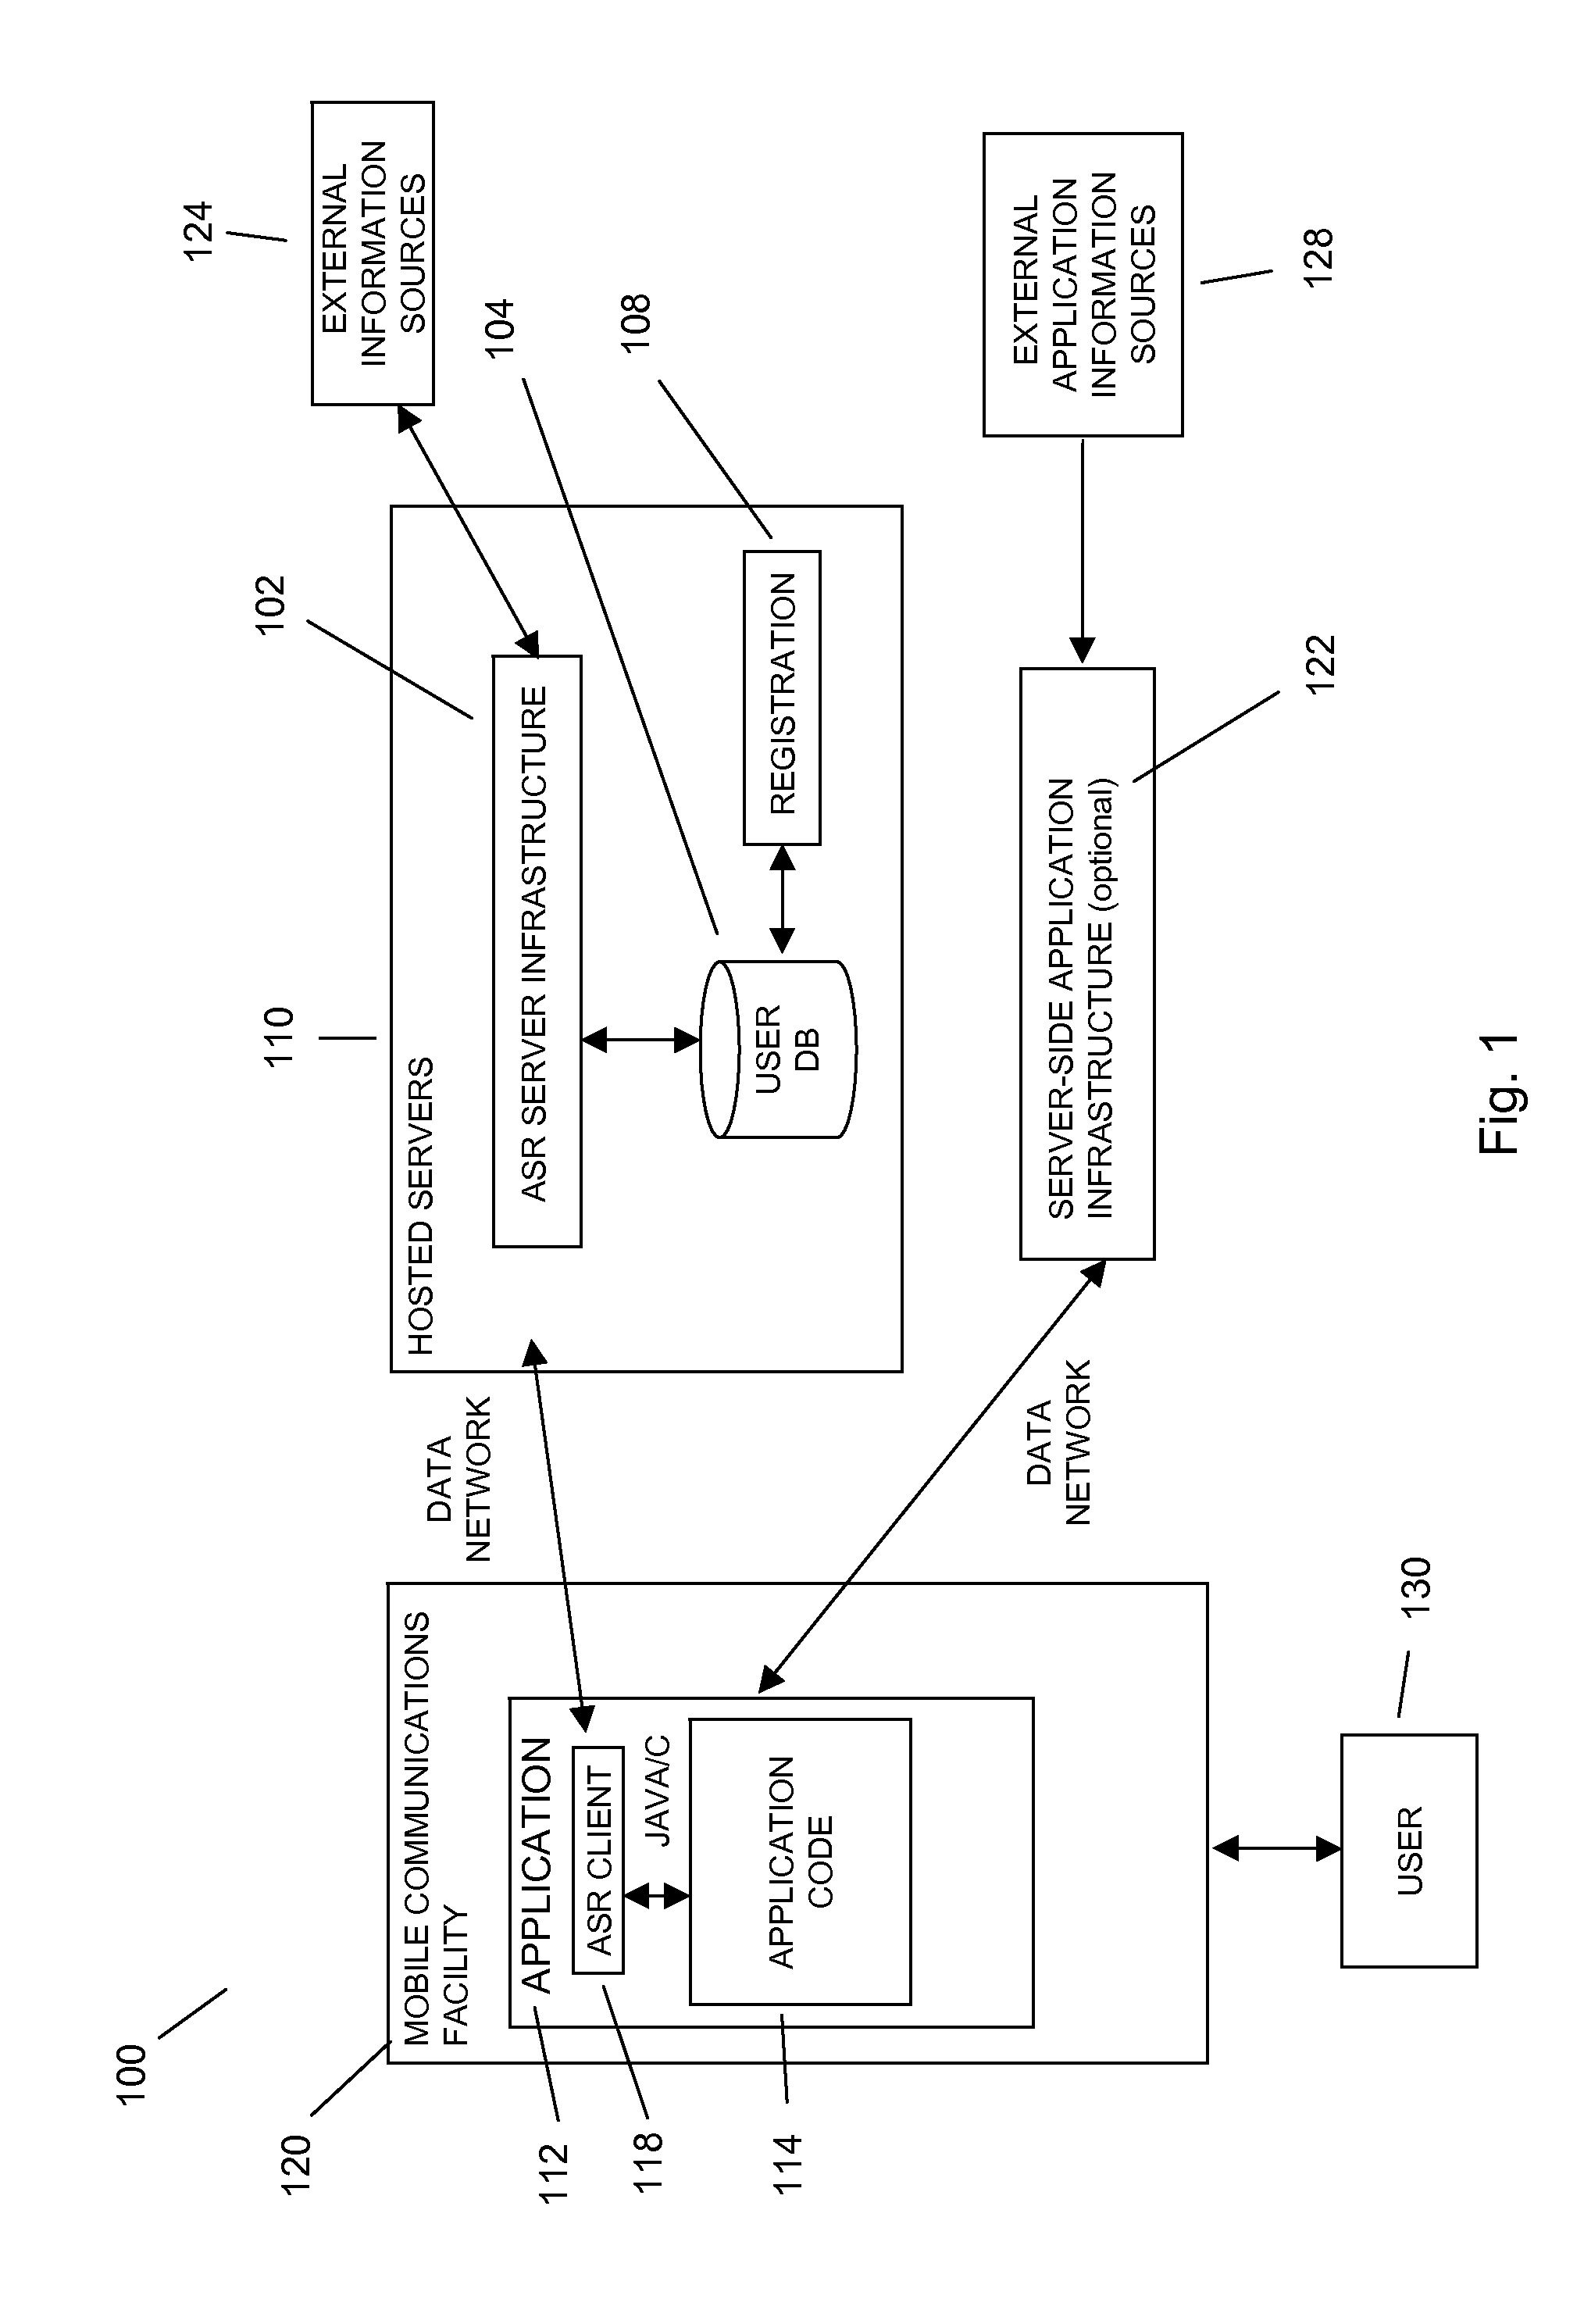 Hybrid command and control between resident and remote speech recognition facilities in a mobile voice-to-speech application